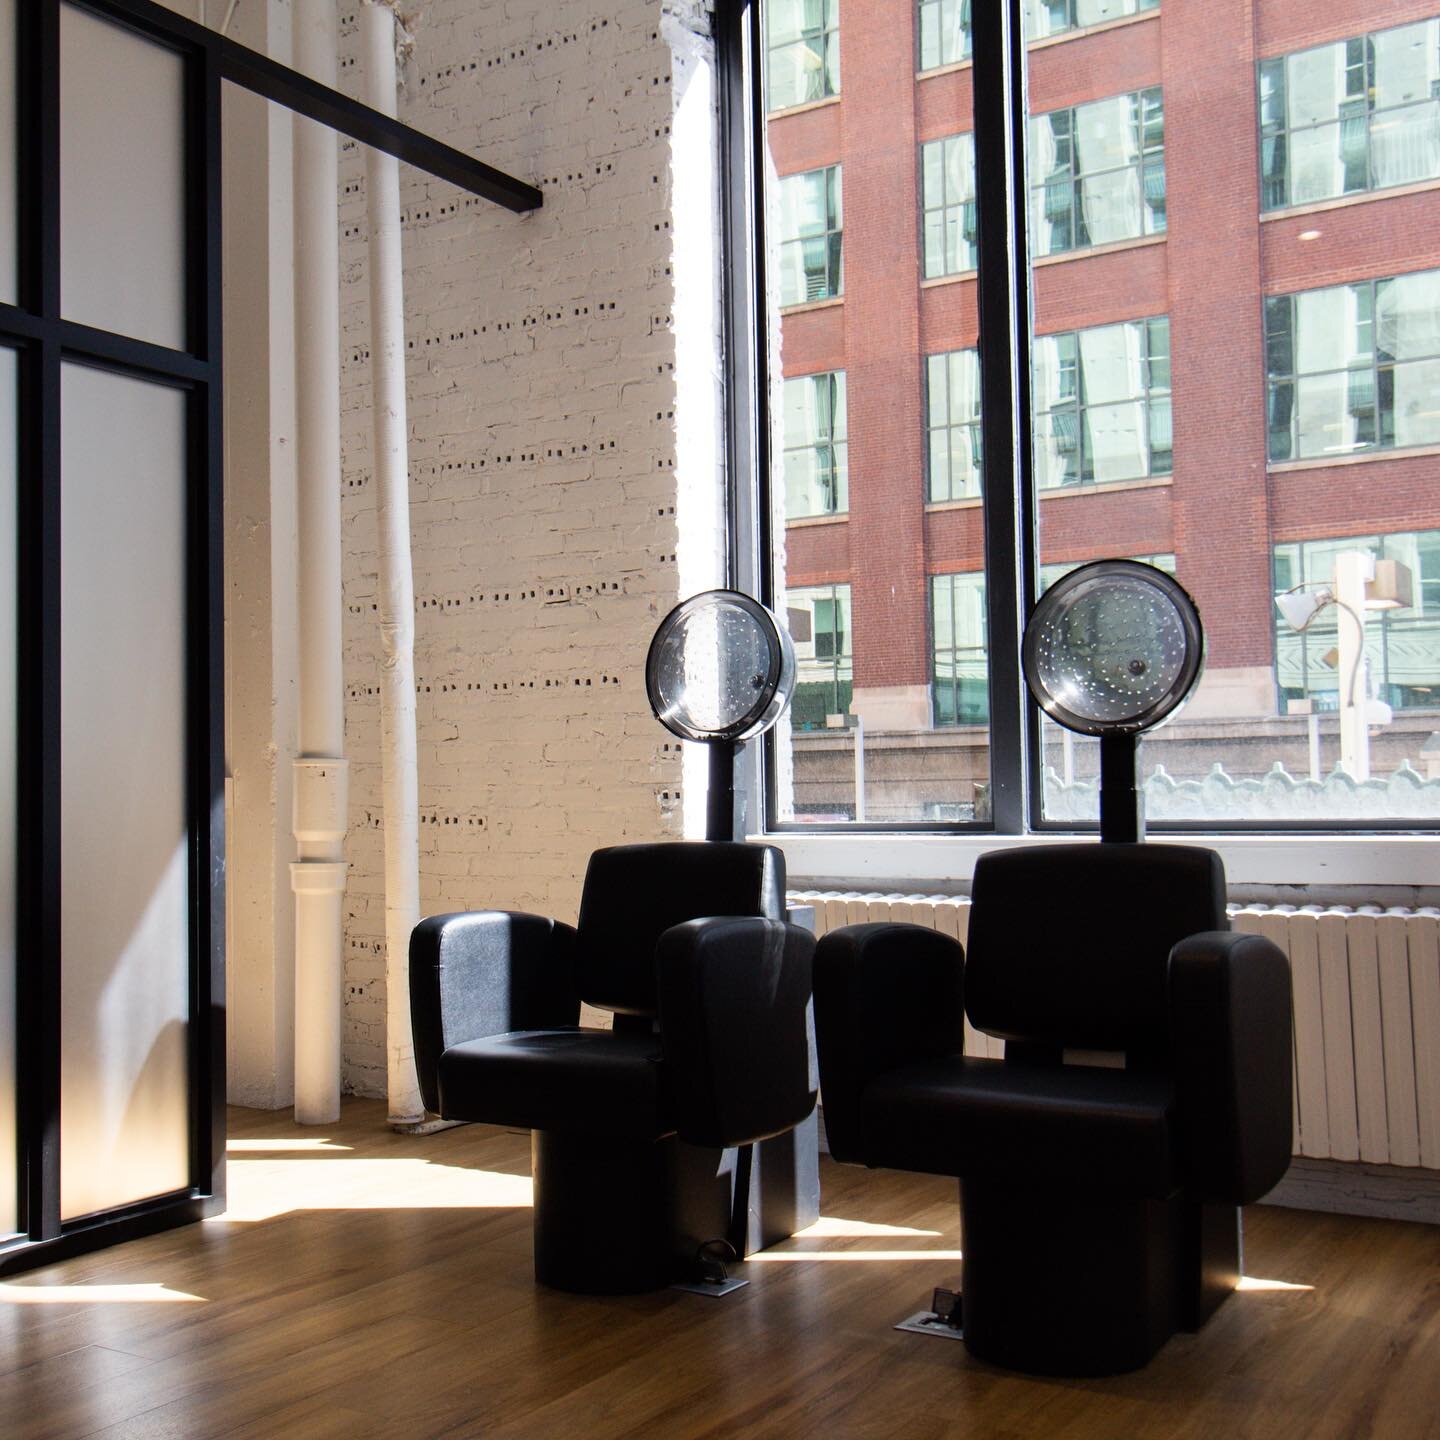 Step into the dream that is Thomas West Salon, nestled in the heart of River North, Chicago. ✨✂️

Our interiors are designed to transport you to a world of luxury, where our talented Hair Stylists work their magic to make your hair dreams come true.
